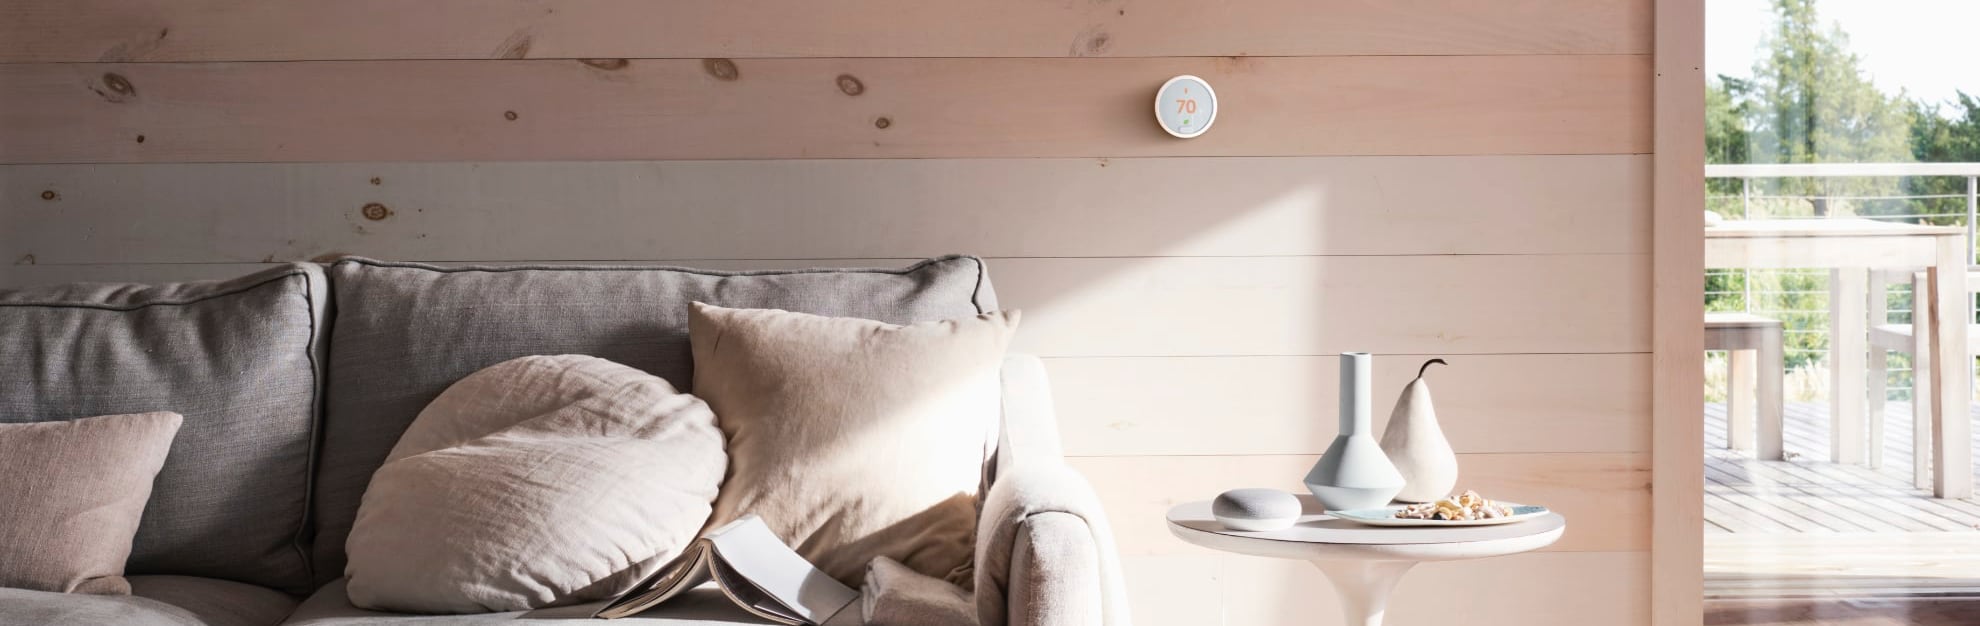 Vivint Home Automation in Tulsa